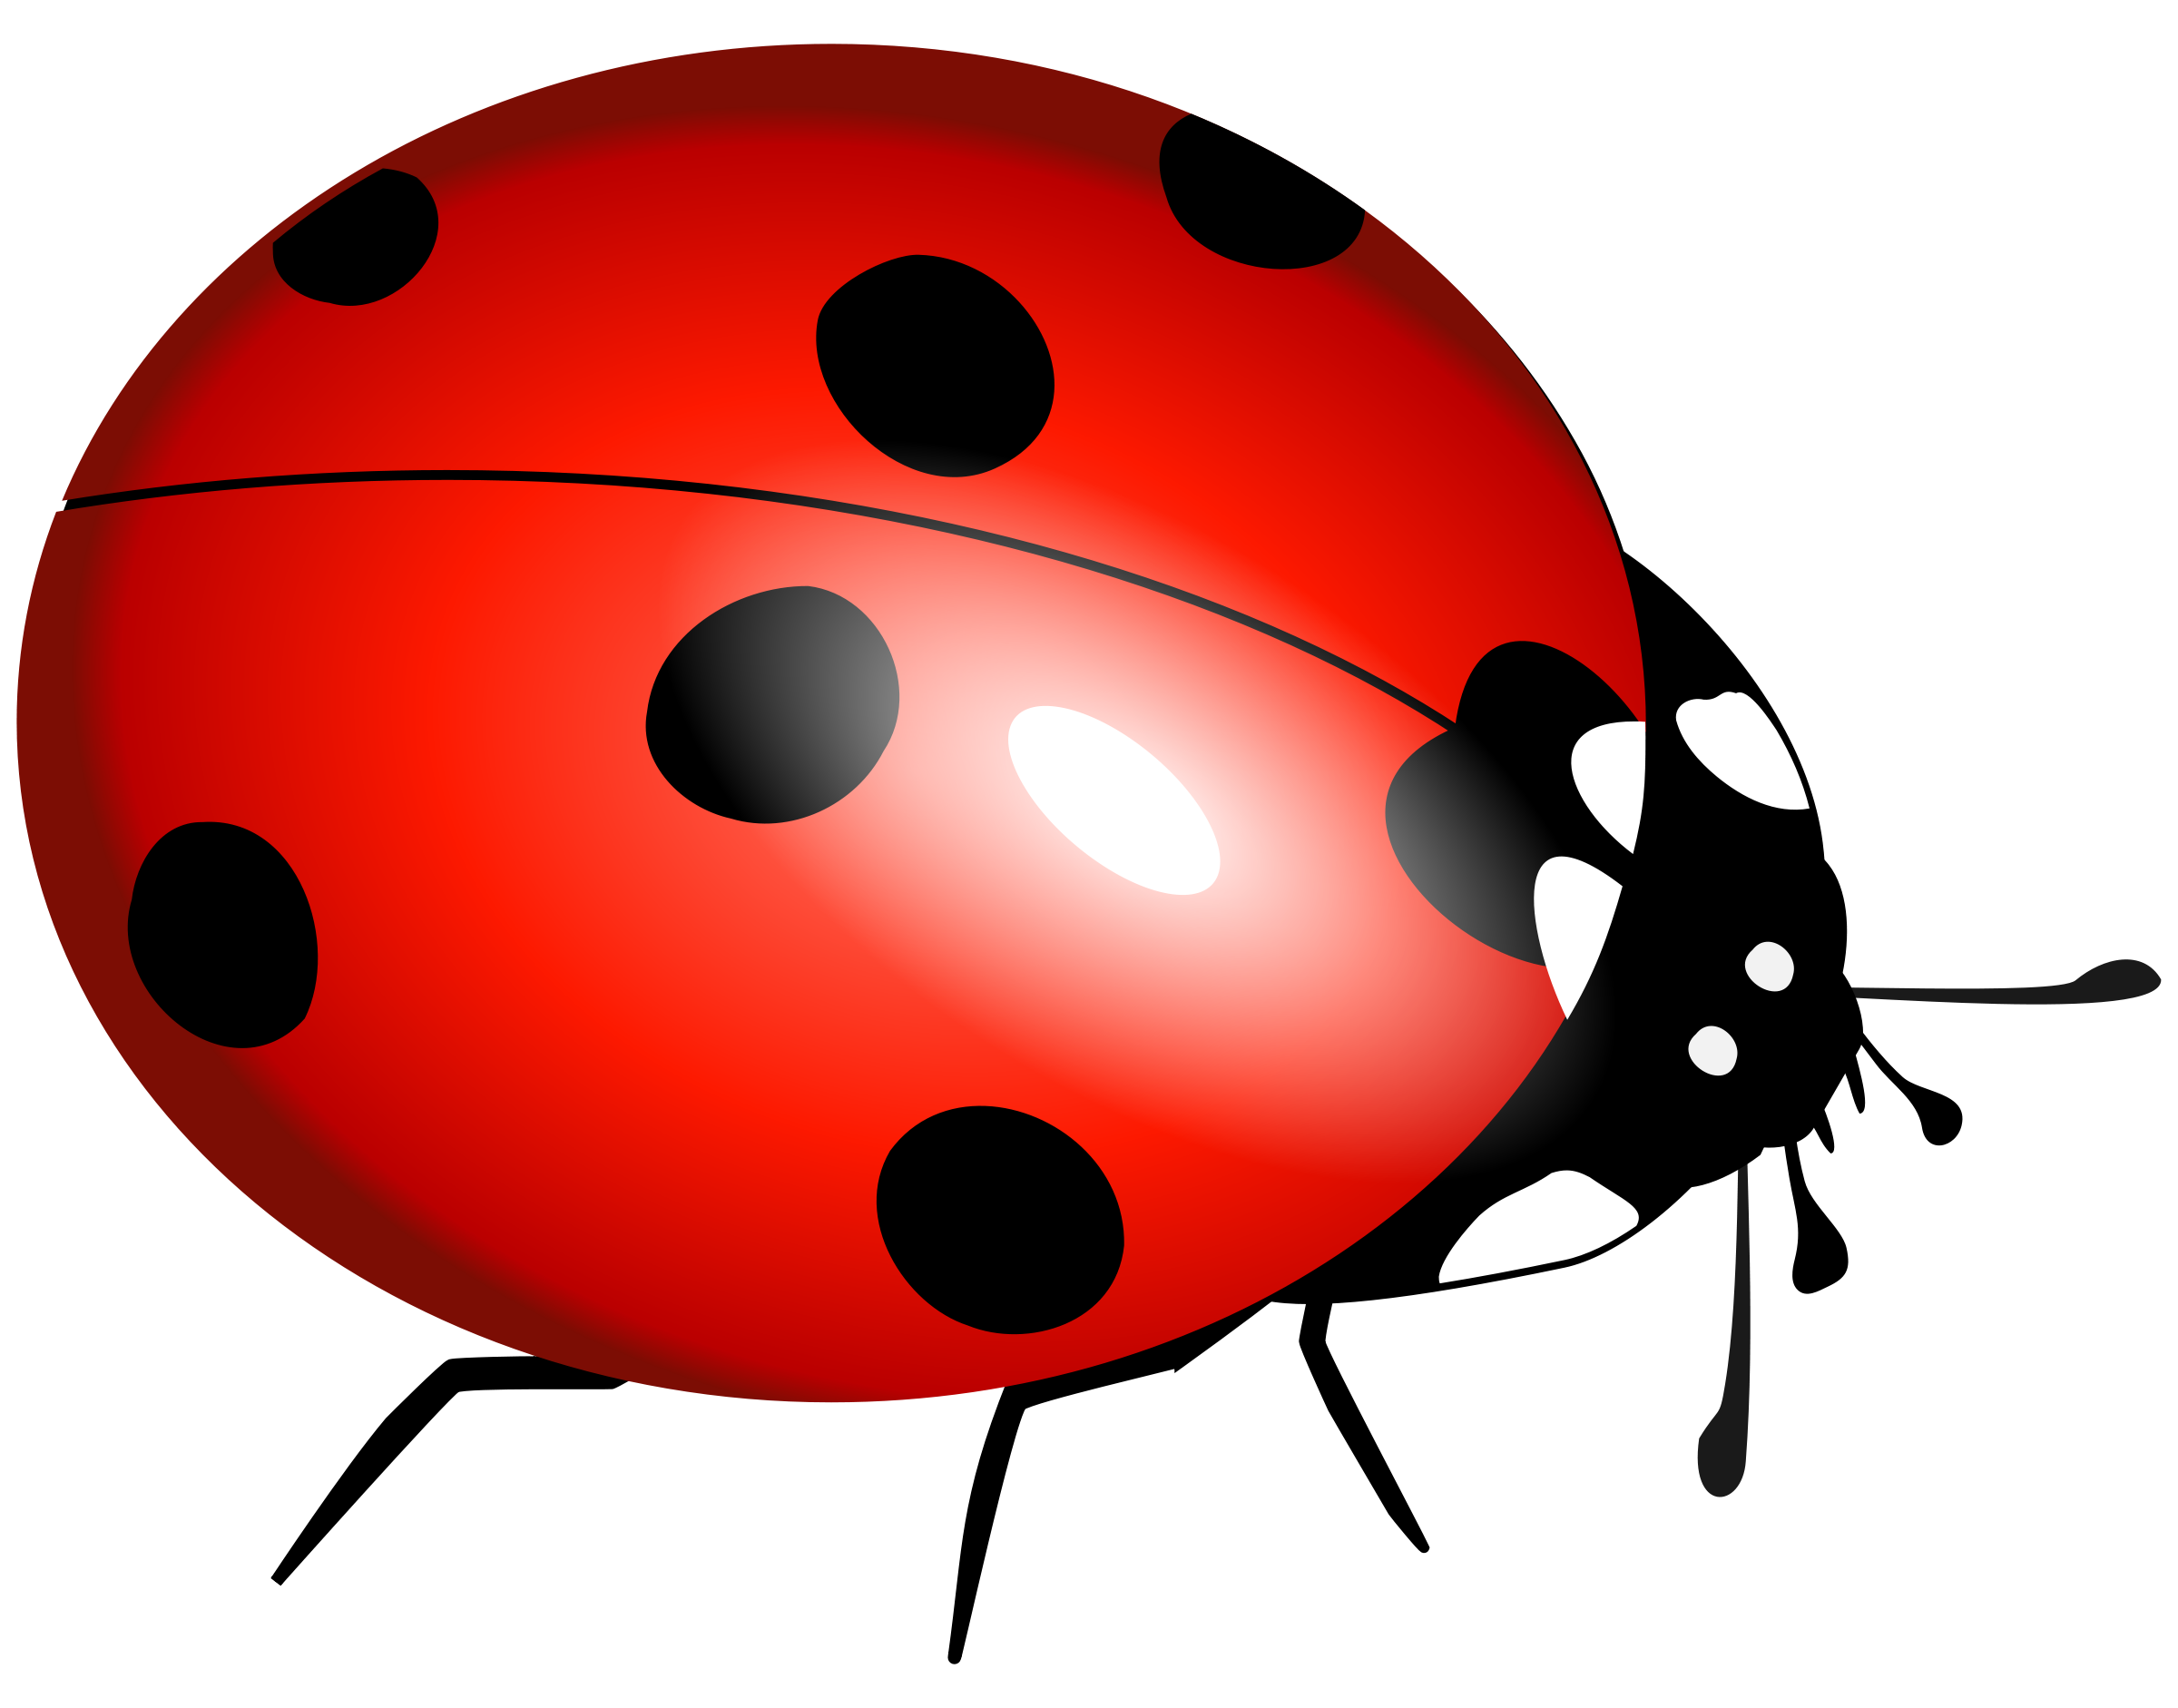 Free Ladybugs Png, Download Free Clip Art, Free Clip Art on